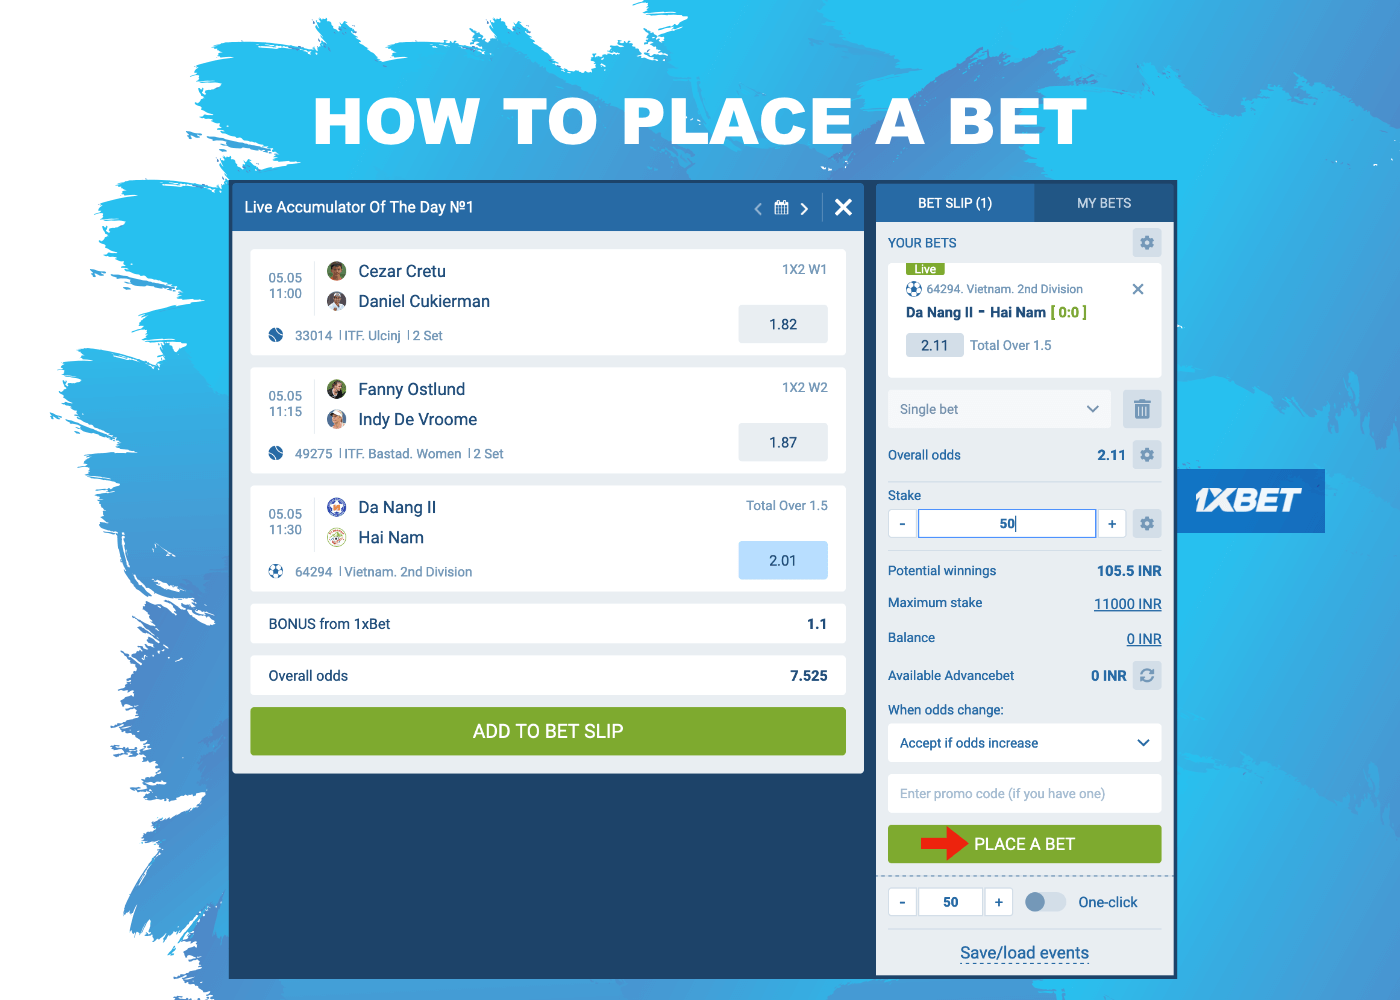 A step-by-step guide on how to bet on 1xbet for players from India